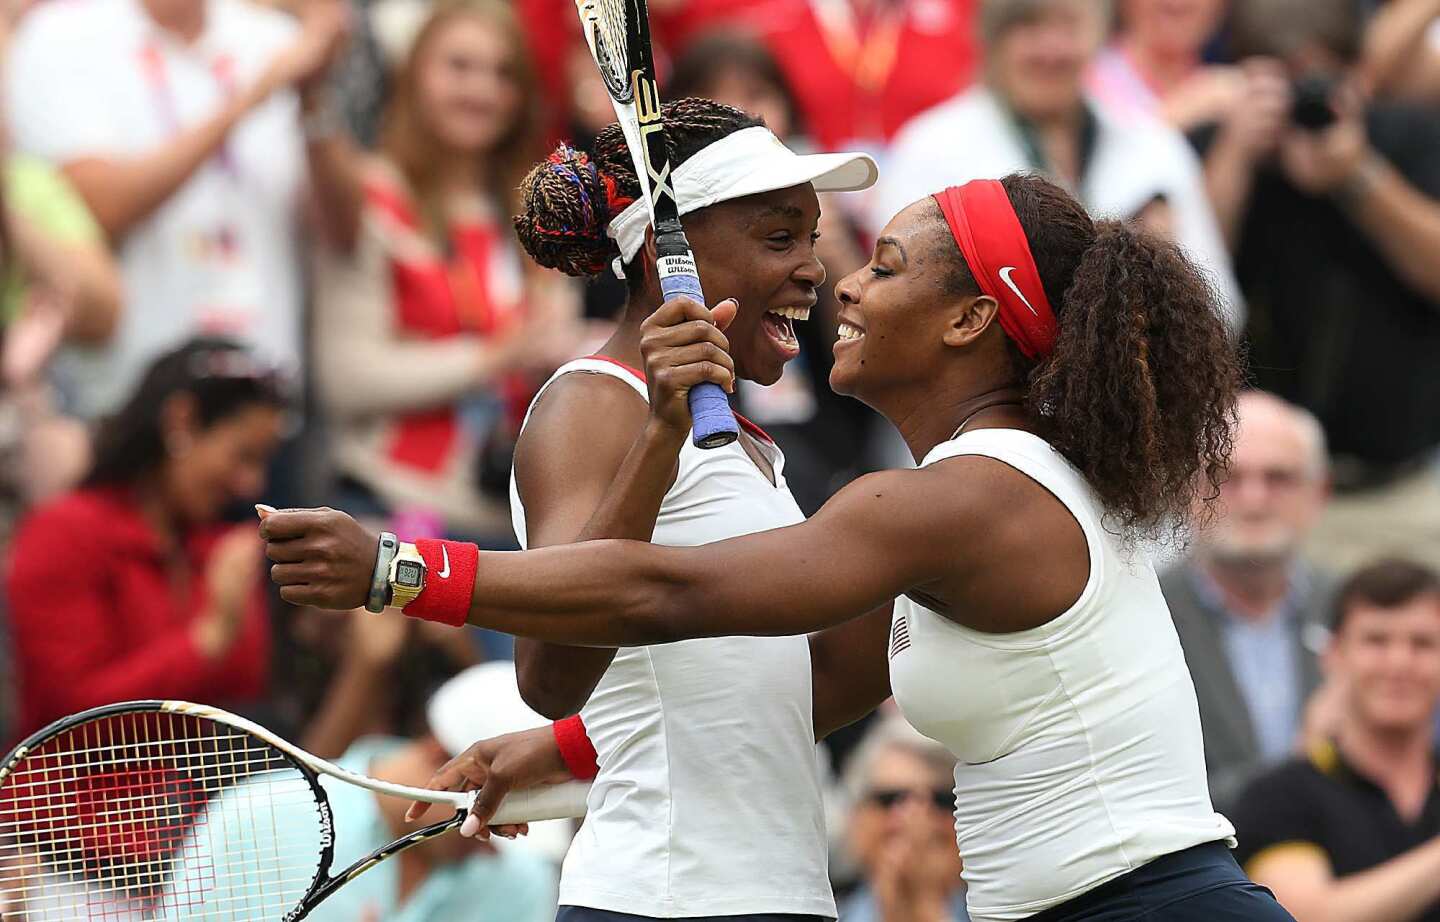 Venus and Serena Williams of Team USA celebrate on Wimbledon's Center Court after winning the women's doubles final. Each sister now has four Olympic gold medals.